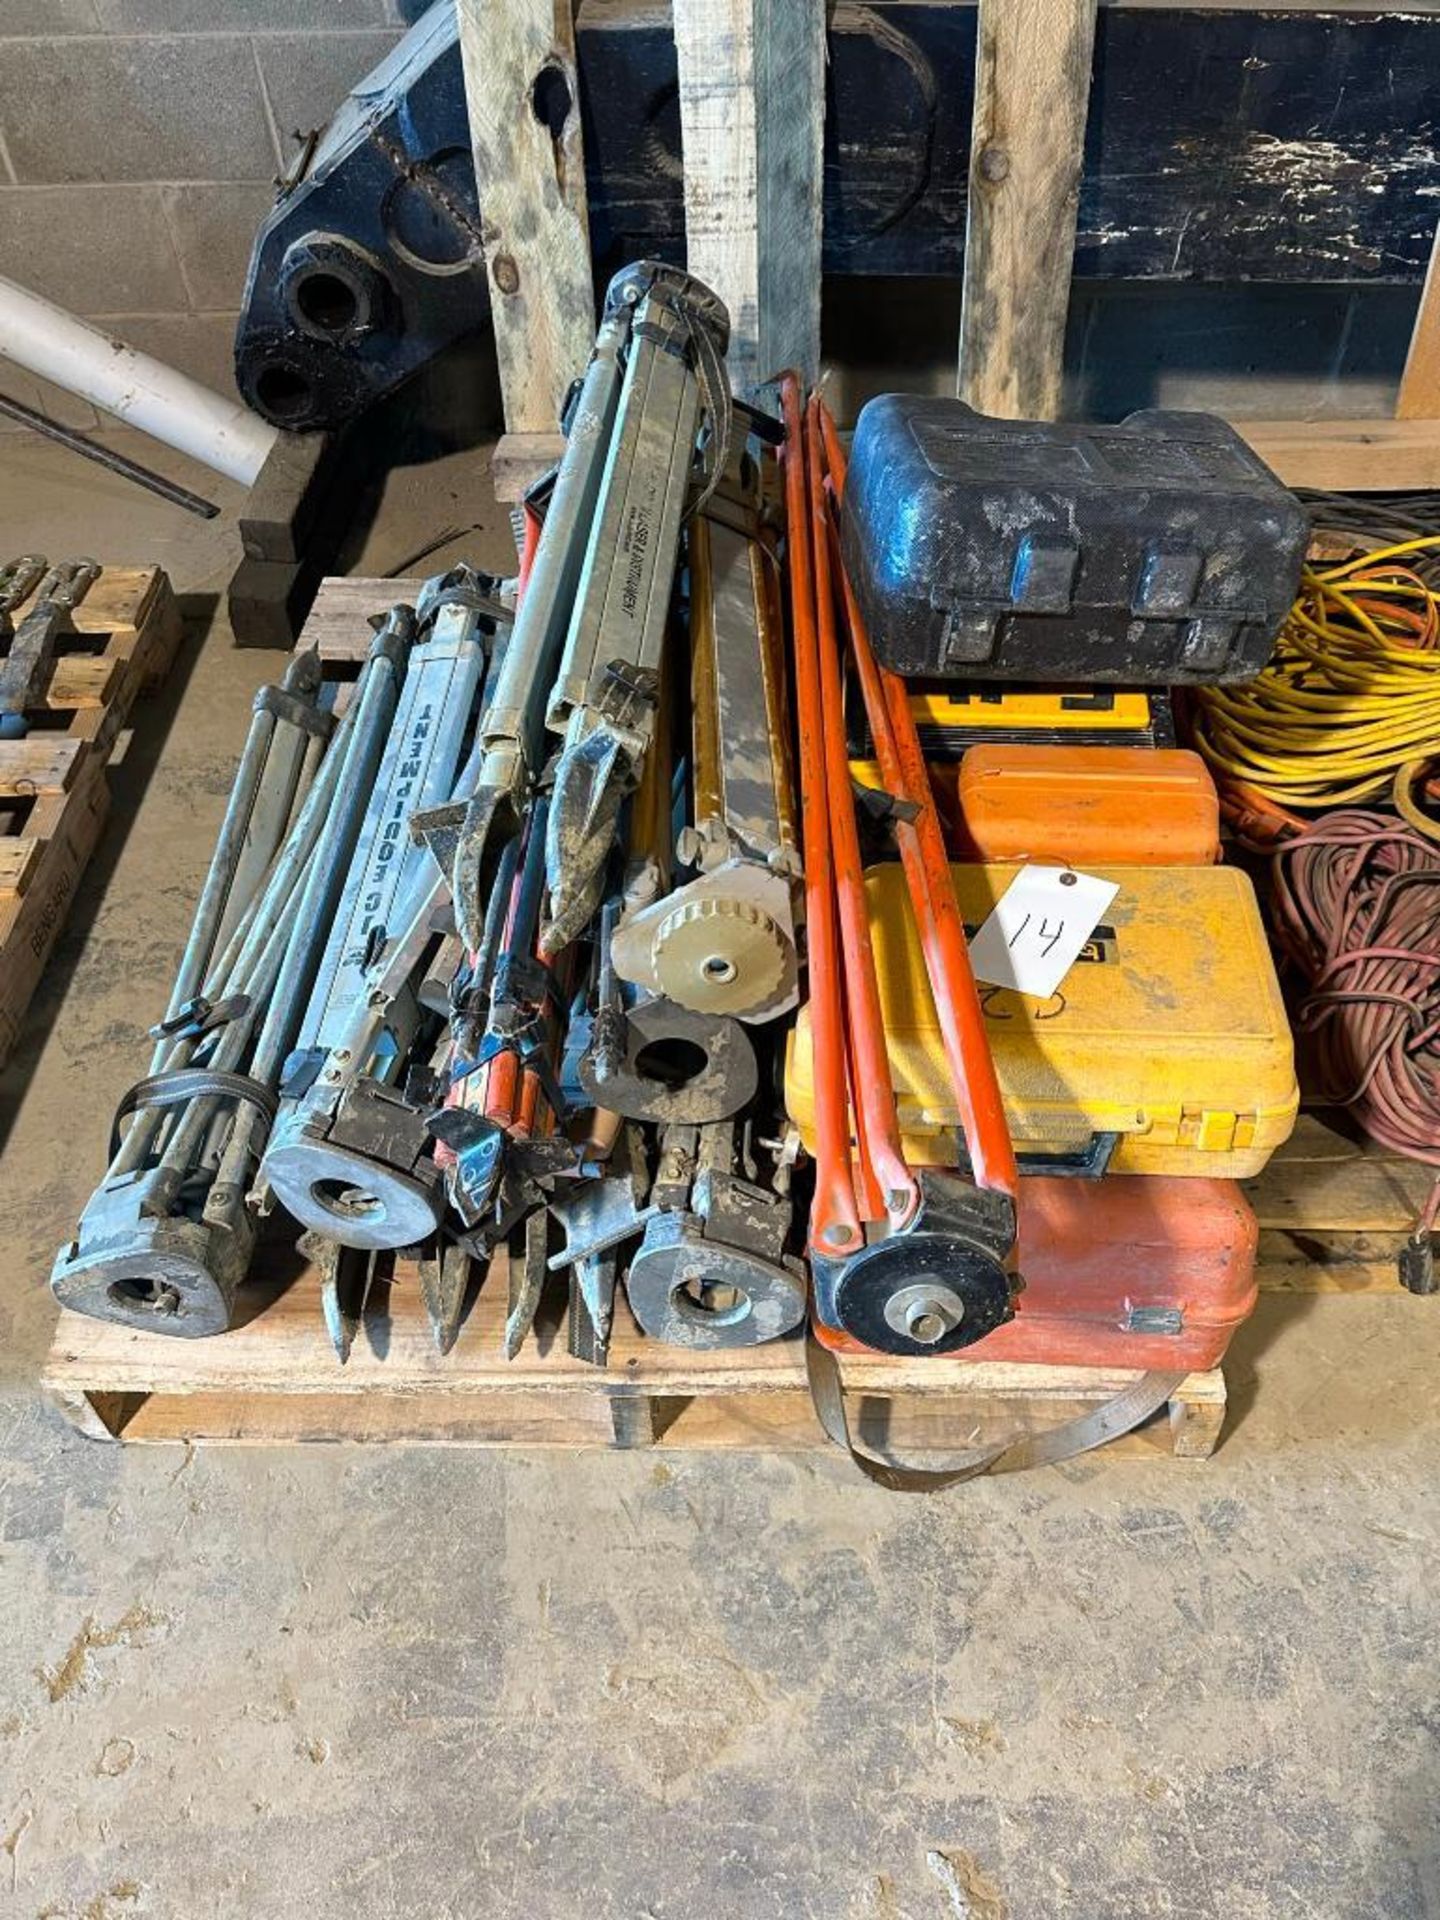 pallet of surveying equipment to include lasers and tripods, unknown condition